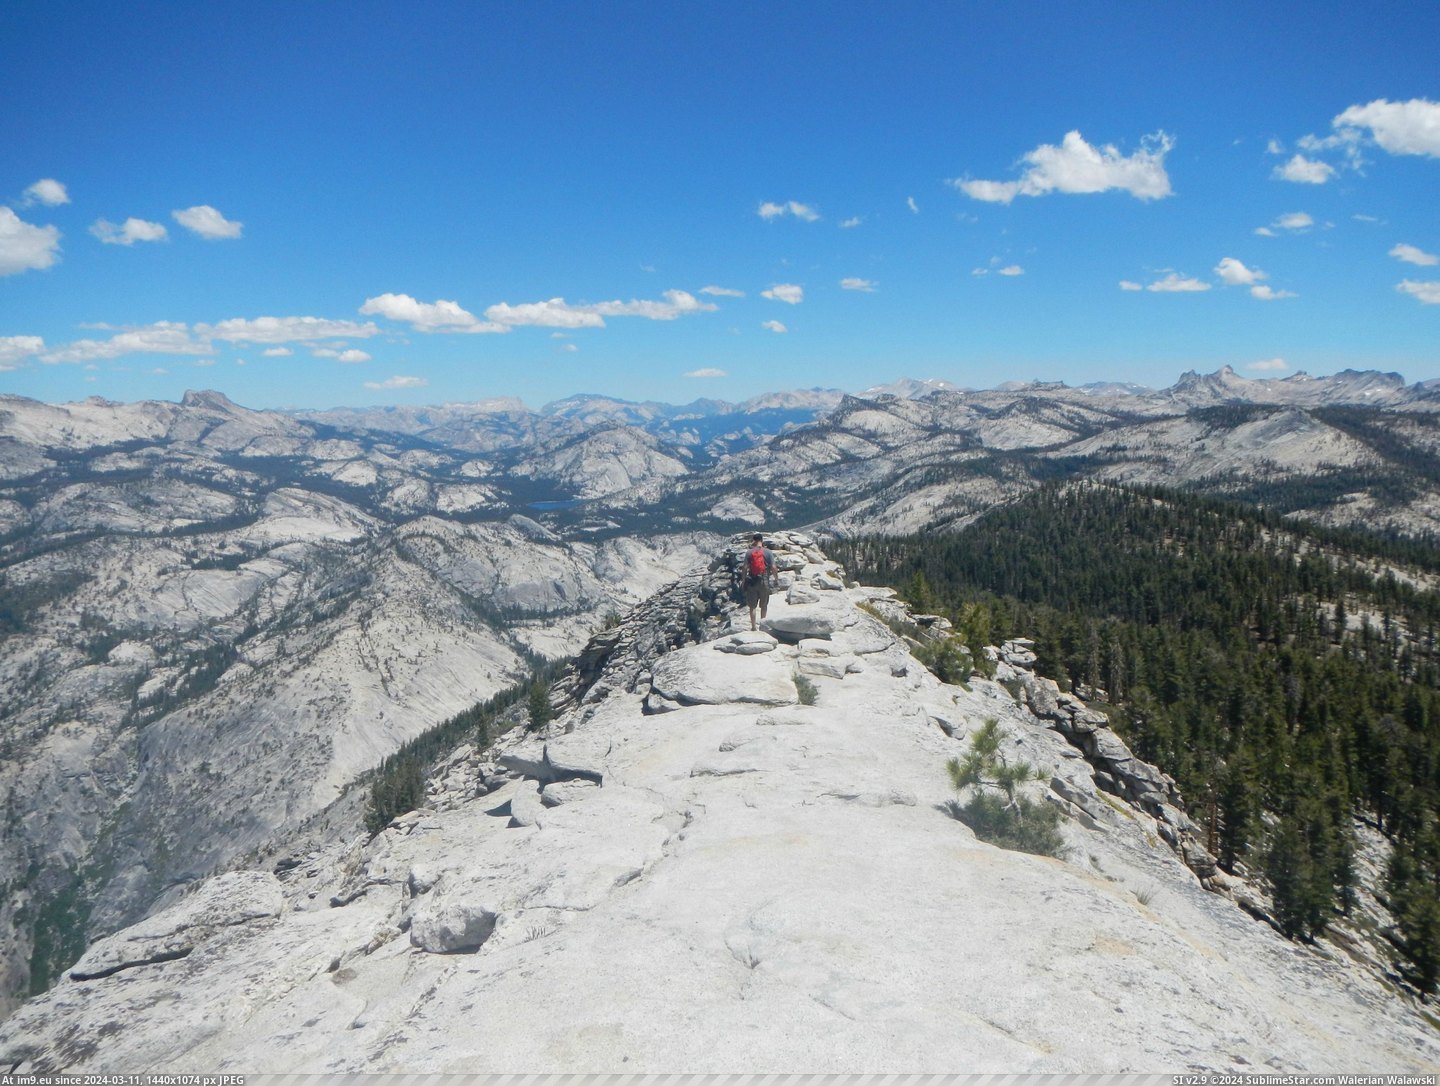 #Shot #Park #National #Trail #Cloud #Descent #Get #Yosemite #Rest [Earthporn] This shot always makes me want to get back on the trail: Descent from Cloud's Rest, Yosemite National Park [OC] [276 Pic. (Изображение из альбом My r/EARTHPORN favs))